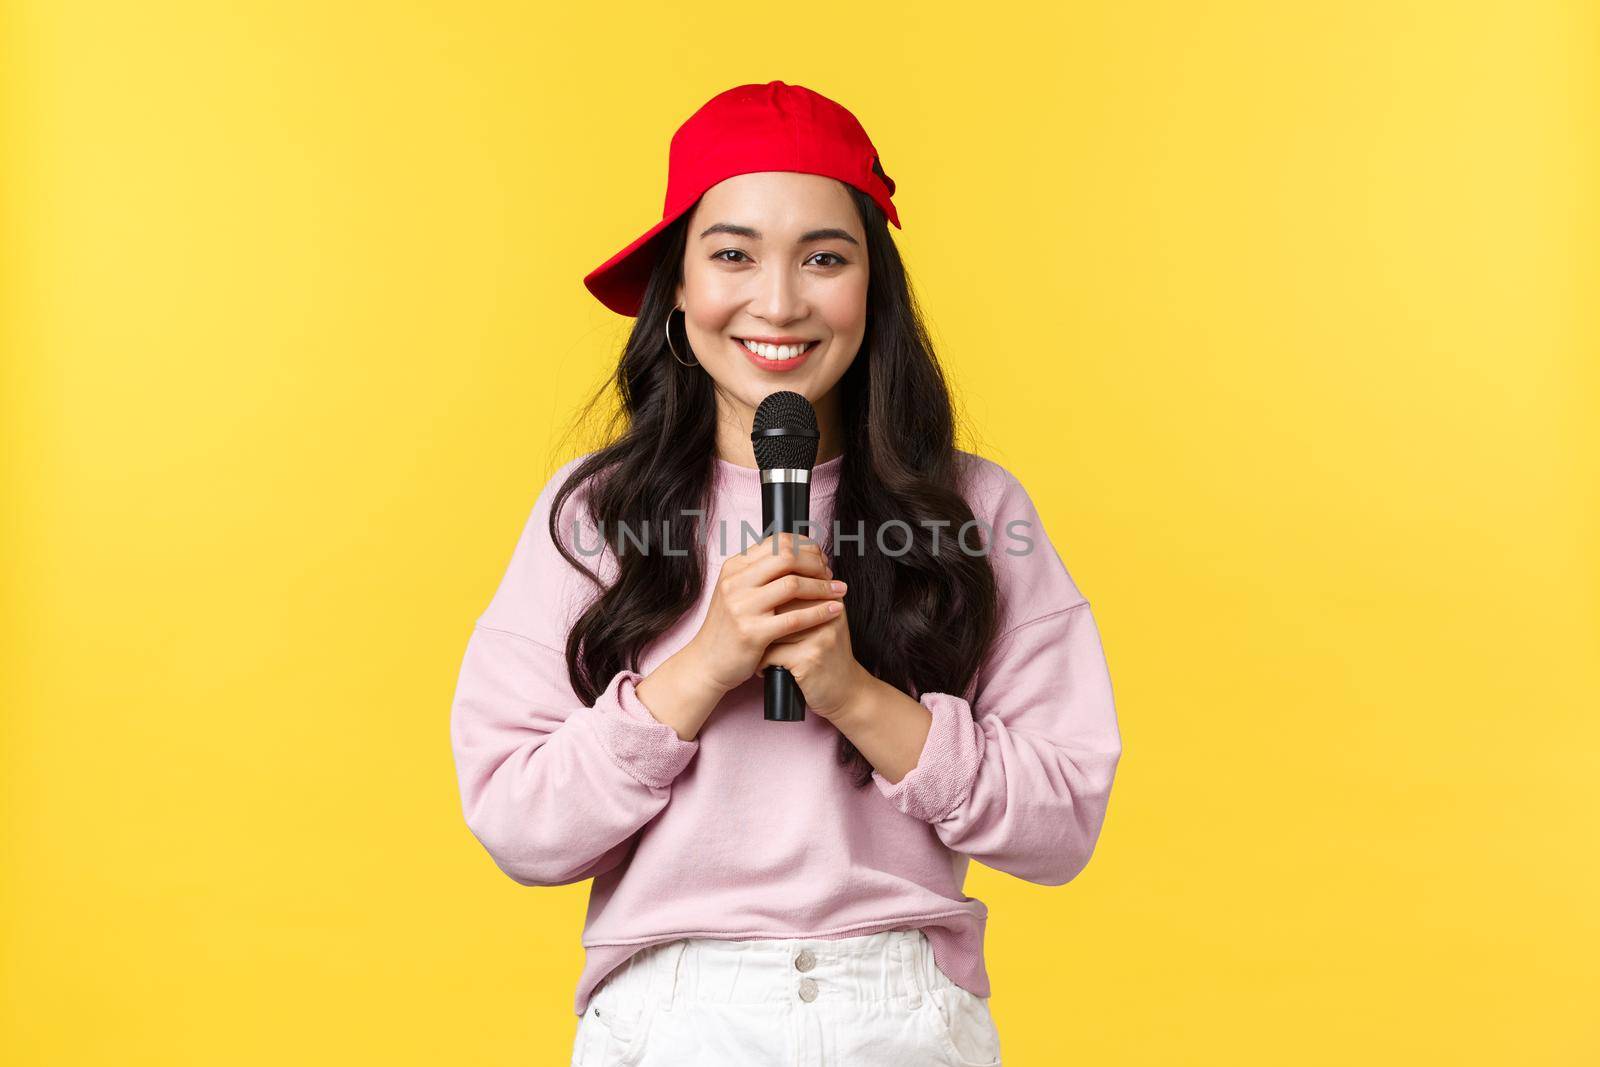 People emotions, lifestyle leisure and beauty concept. Cute smiling asian woman performer singing song in red cap, holding microphone as giving speech or sing rap, standing yellow background.